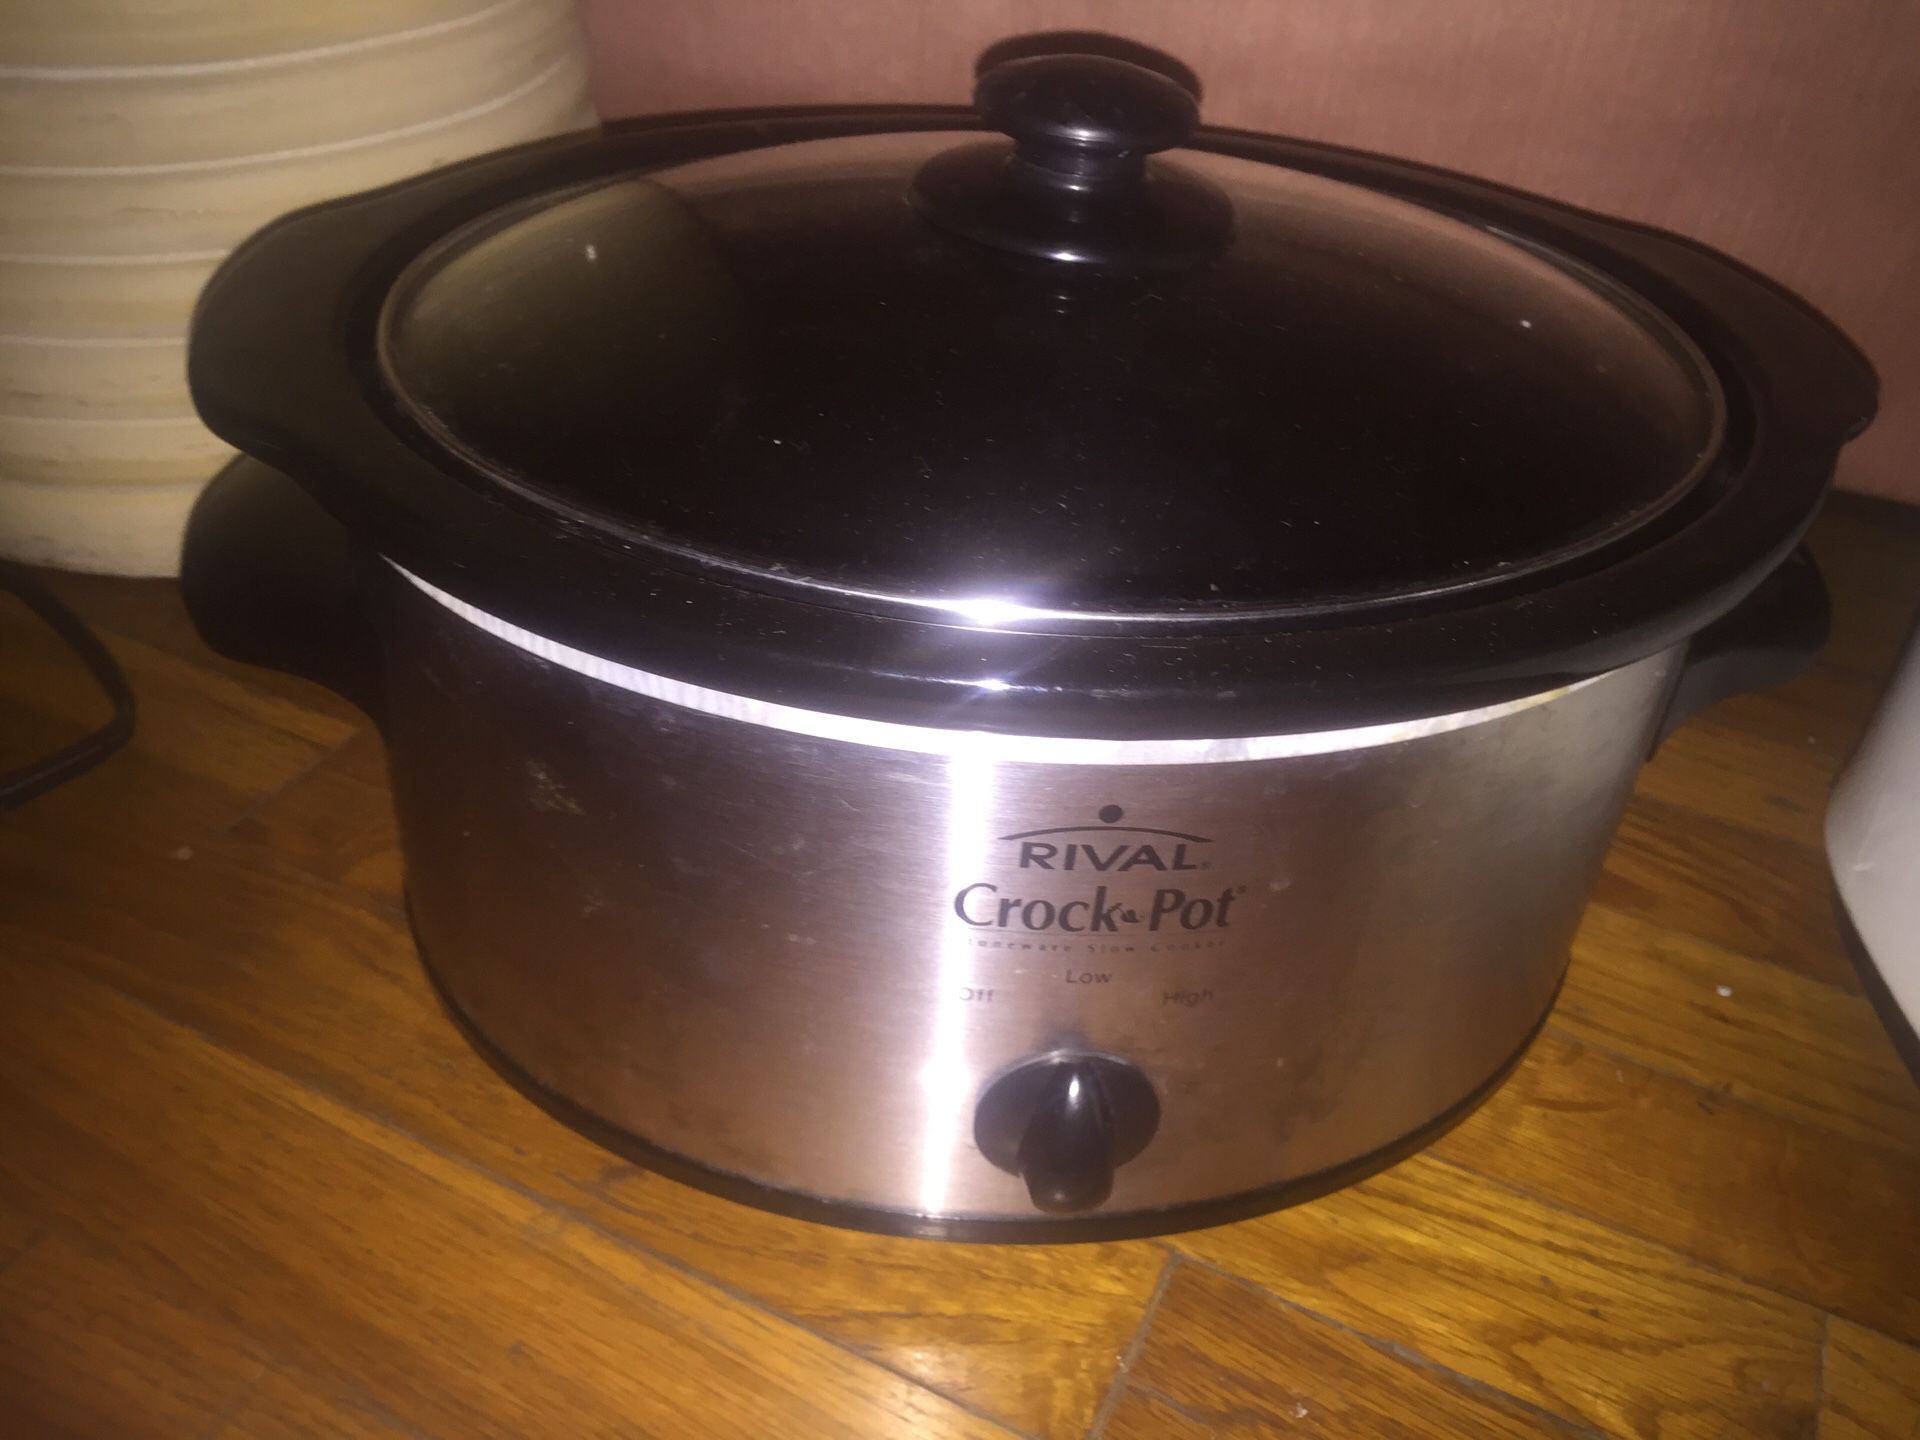 Crock pot in great working condition